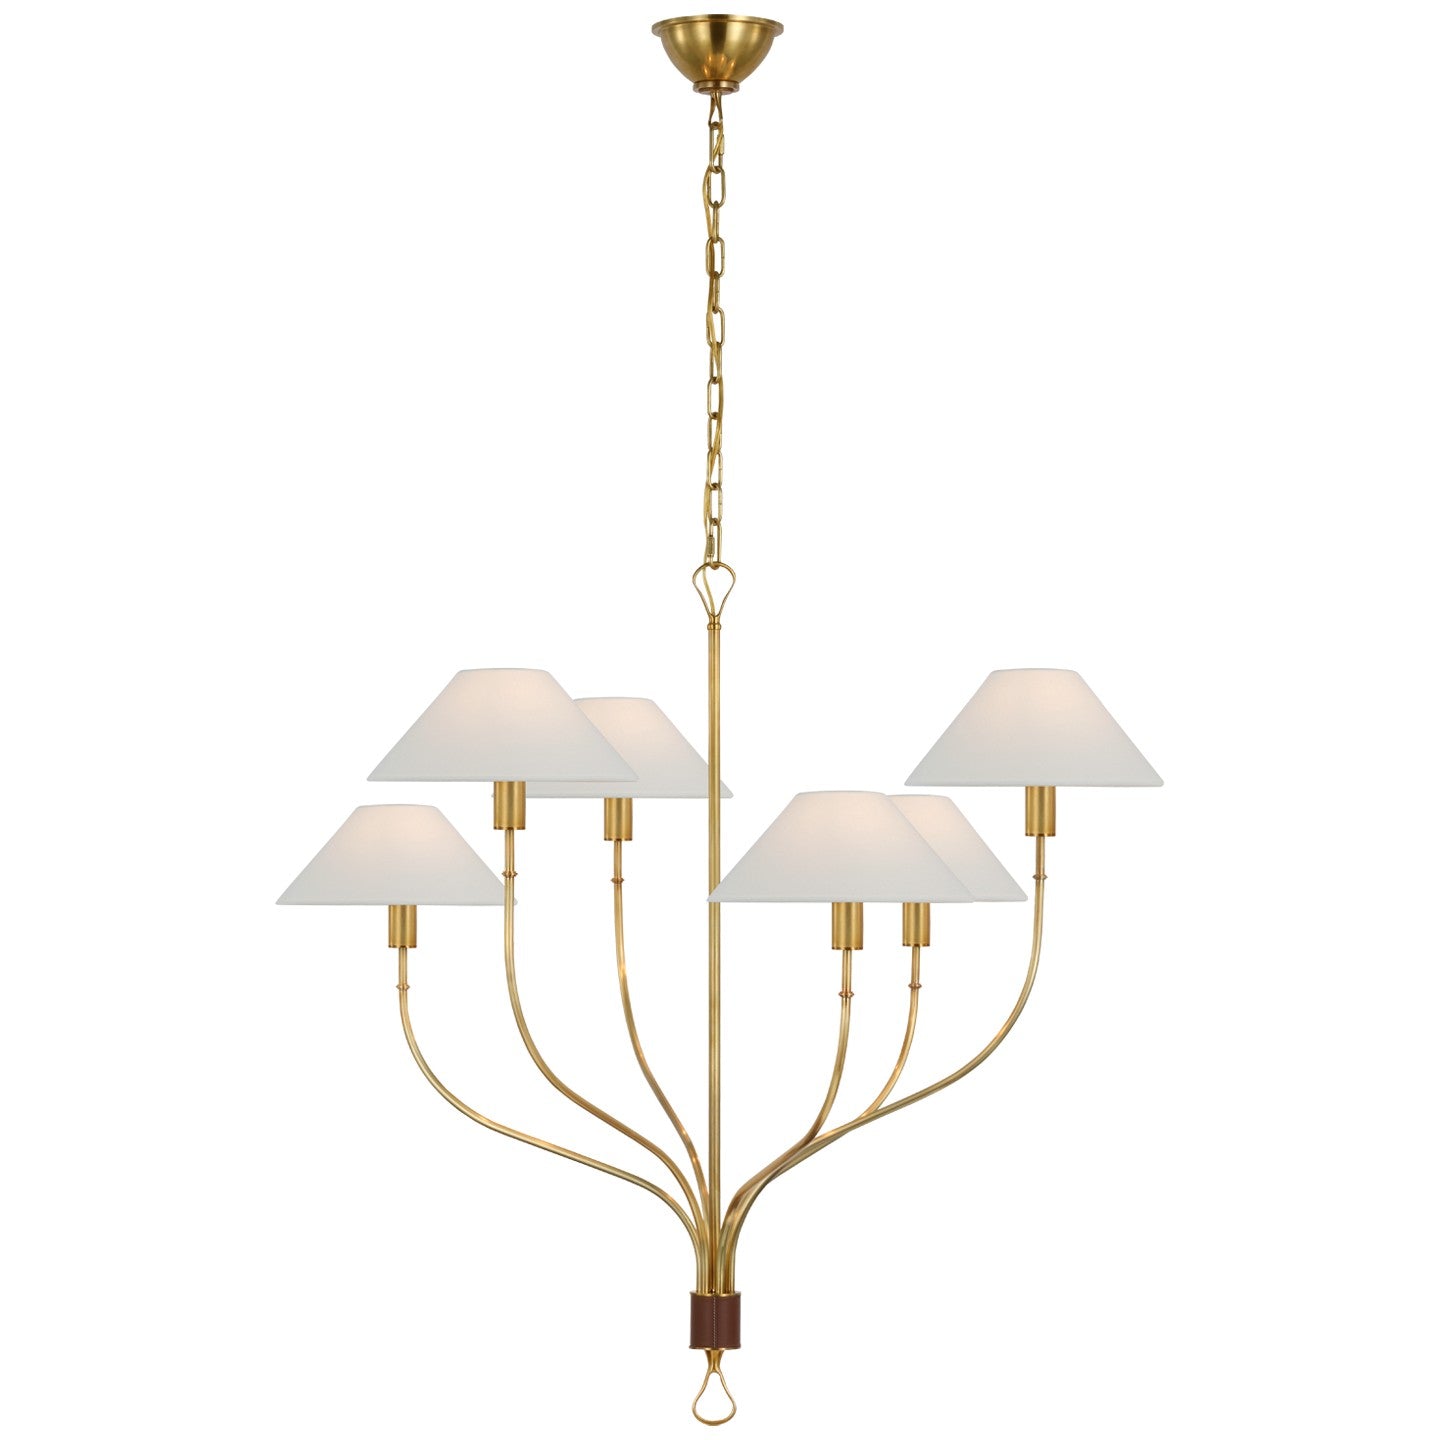 Visual Comfort Signature Canada - LED Chandelier - Griffin - Hand-Rubbed Antique Brass and Saddle Leather- Union Lighting Luminaires Decor